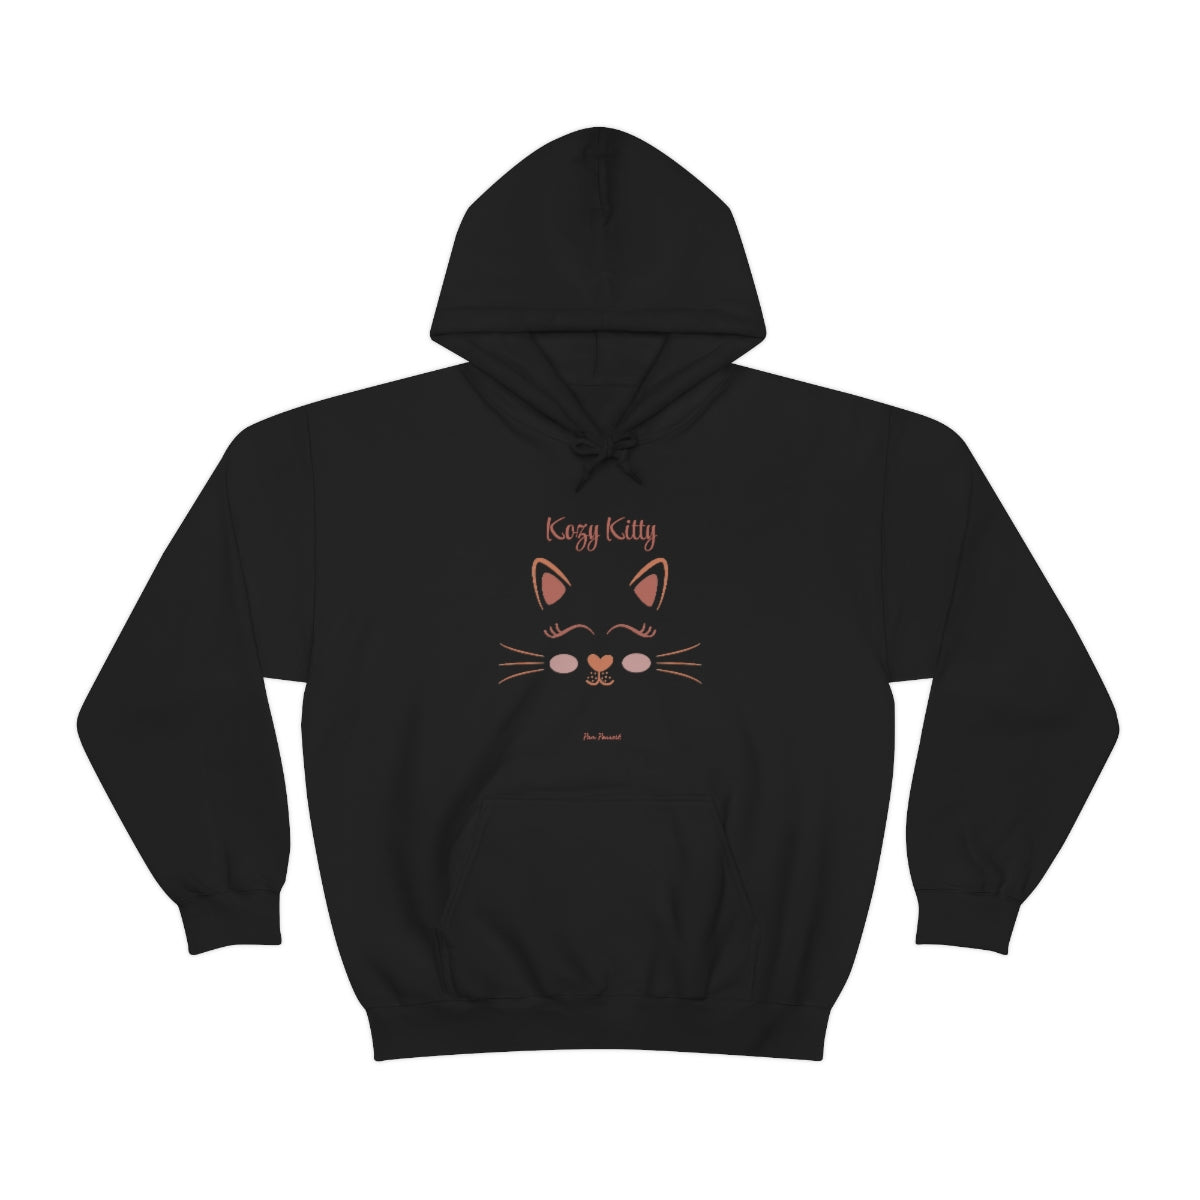 Flat front view of the Black hoodie